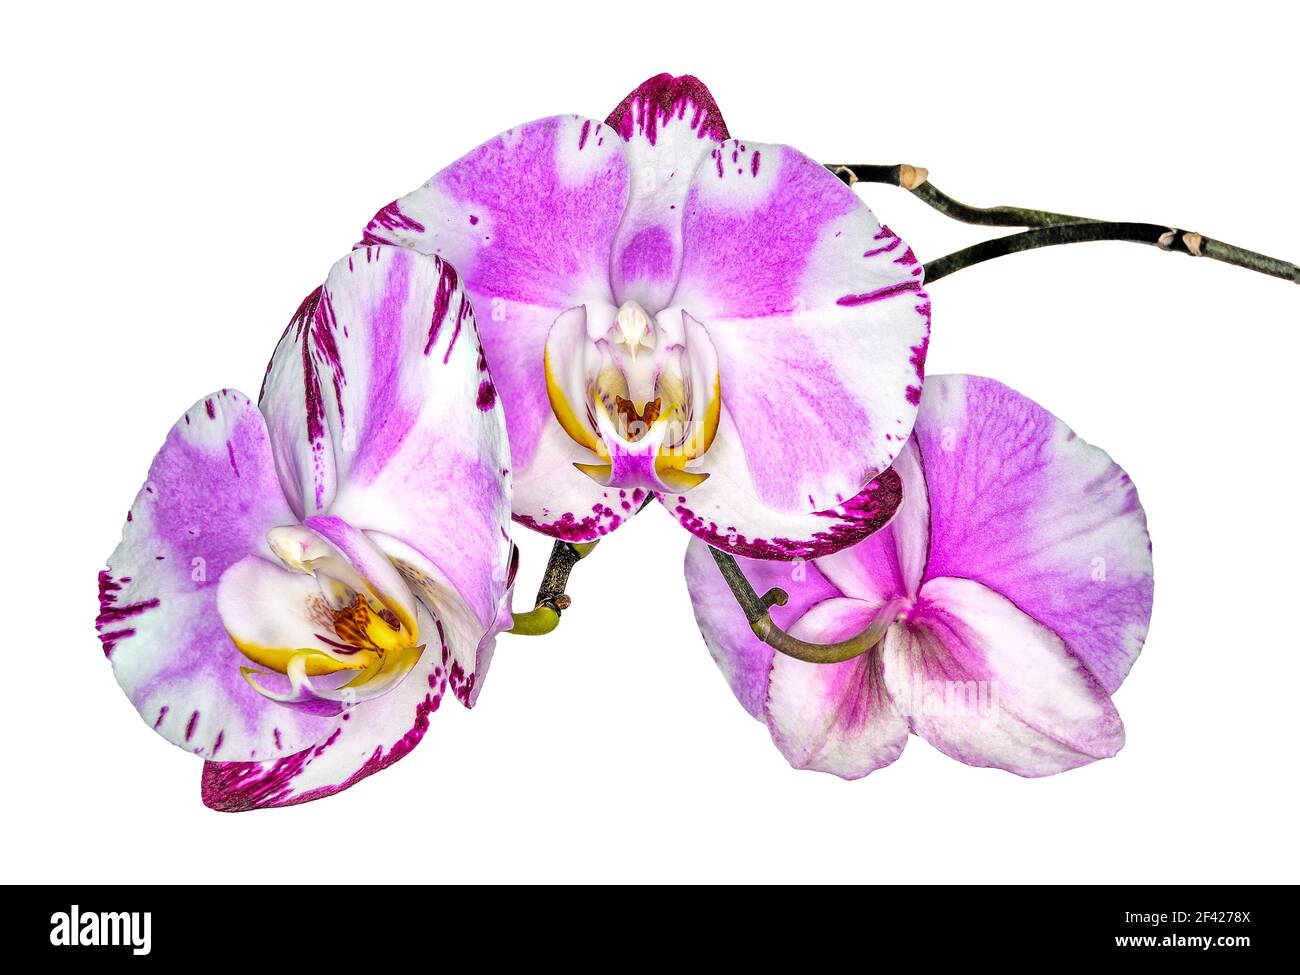 Blossoming multicolored orchid phalaenopsis, cultivar Pink Dancer, on white background isolated. Beautiful white pink tropical flowers with purple edg Stock Photo